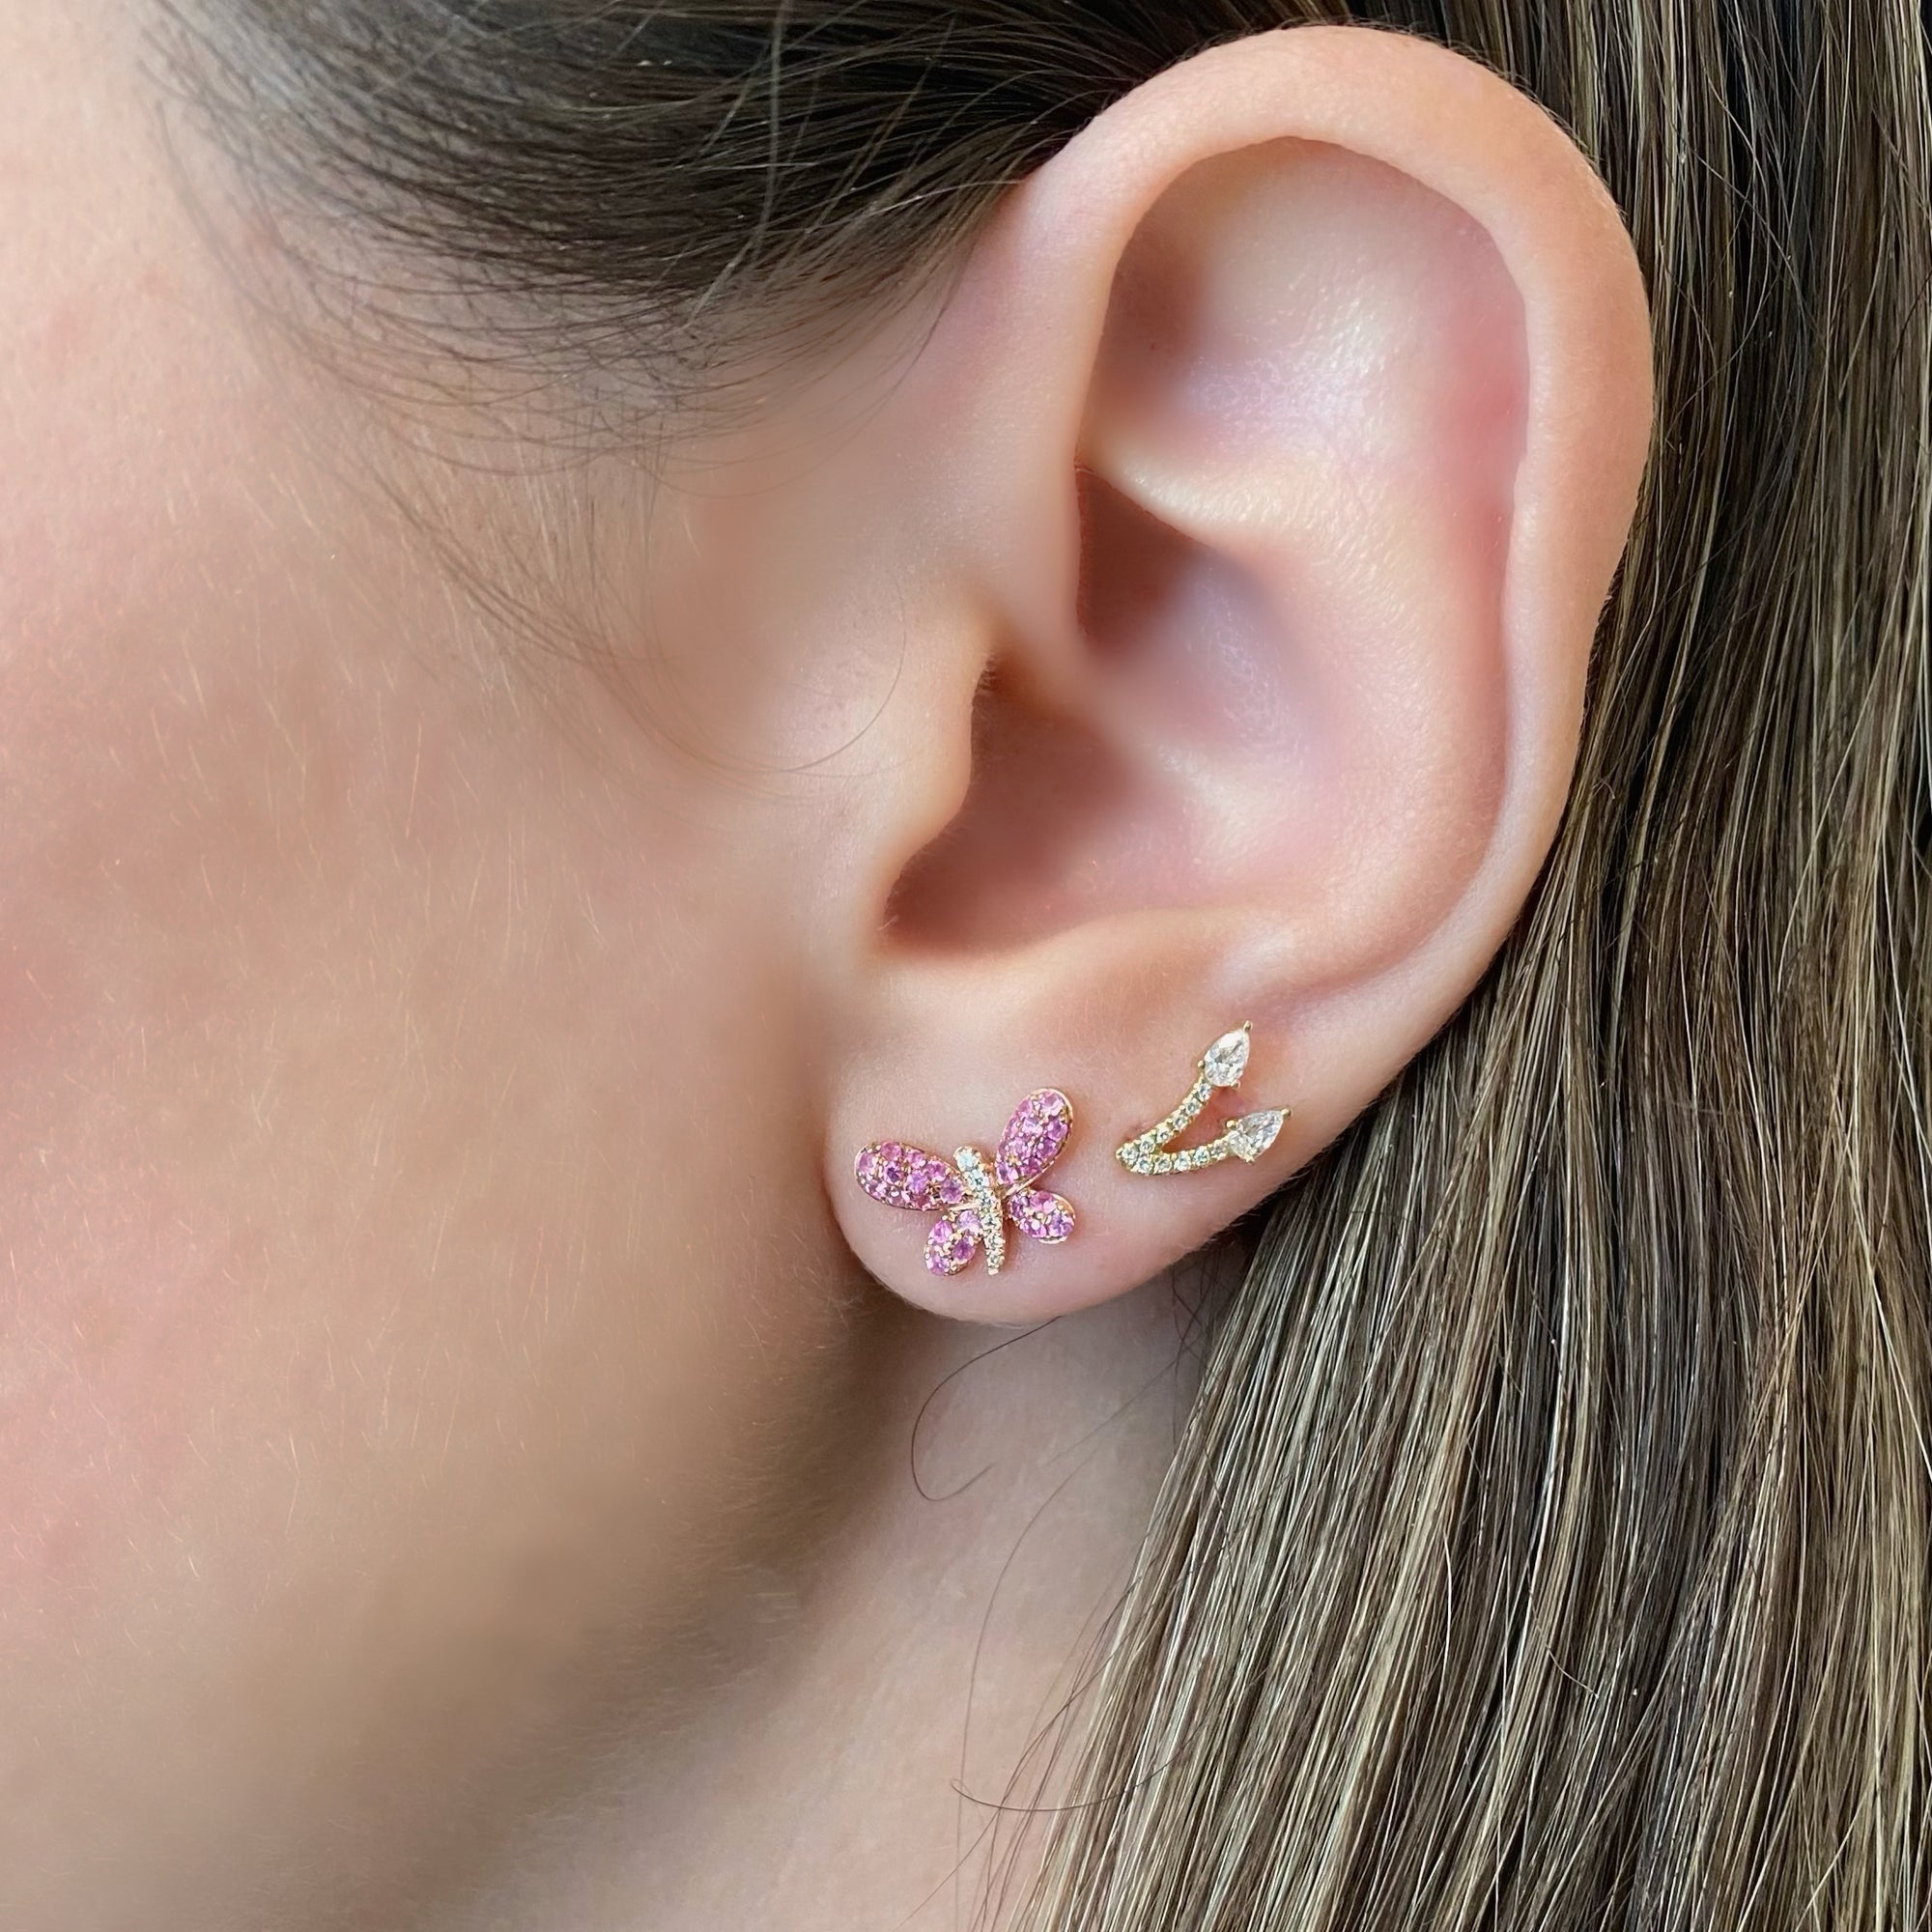 Pink Sapphire & Diamond Butterfly Stud Earrings - 14K rose  gold weighing 1.89 grams  - 12 round diamonds totaling 0.05 carats  - 56 pink sapphires totaling 0.52 carats